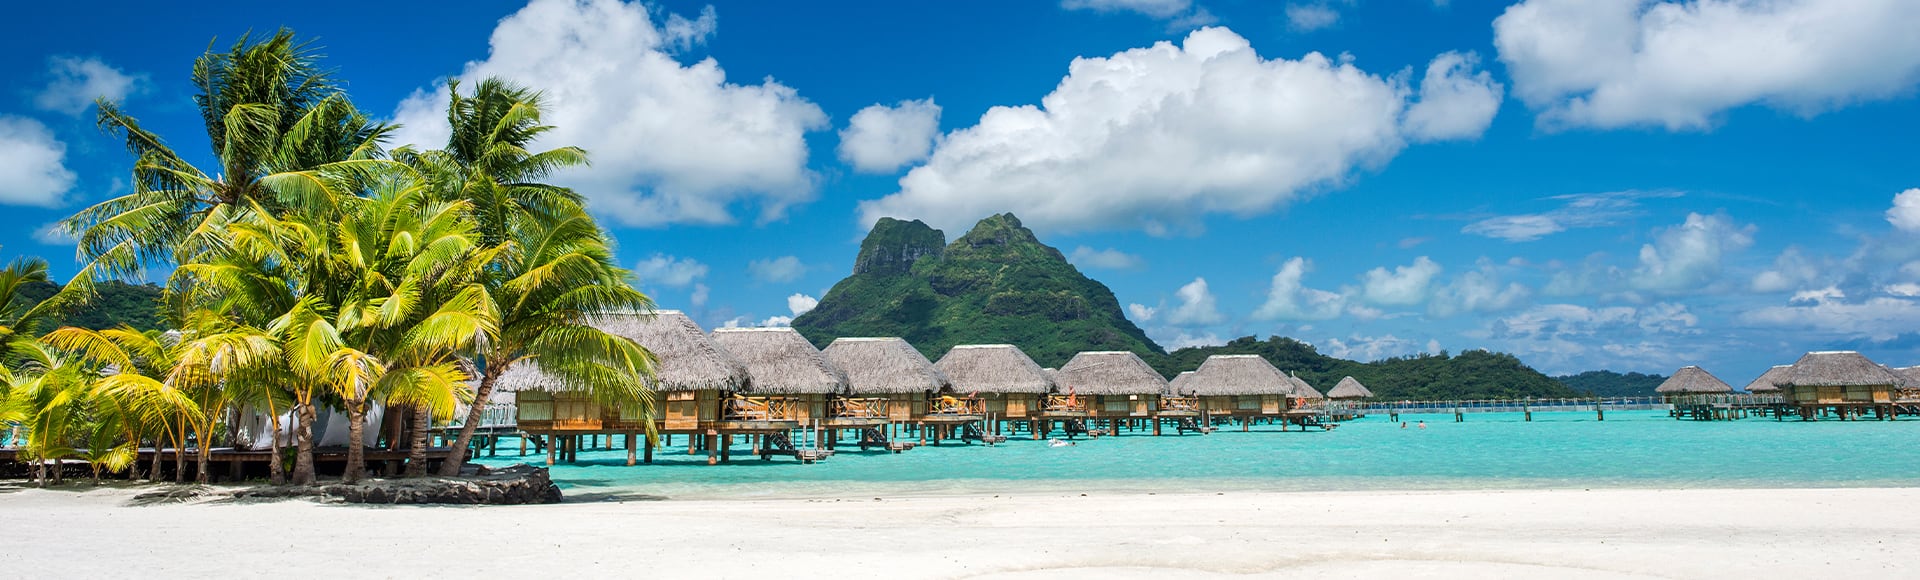 2025 Polynesia Voyages: In-Depth Island Explorations, Natural Wonders & More